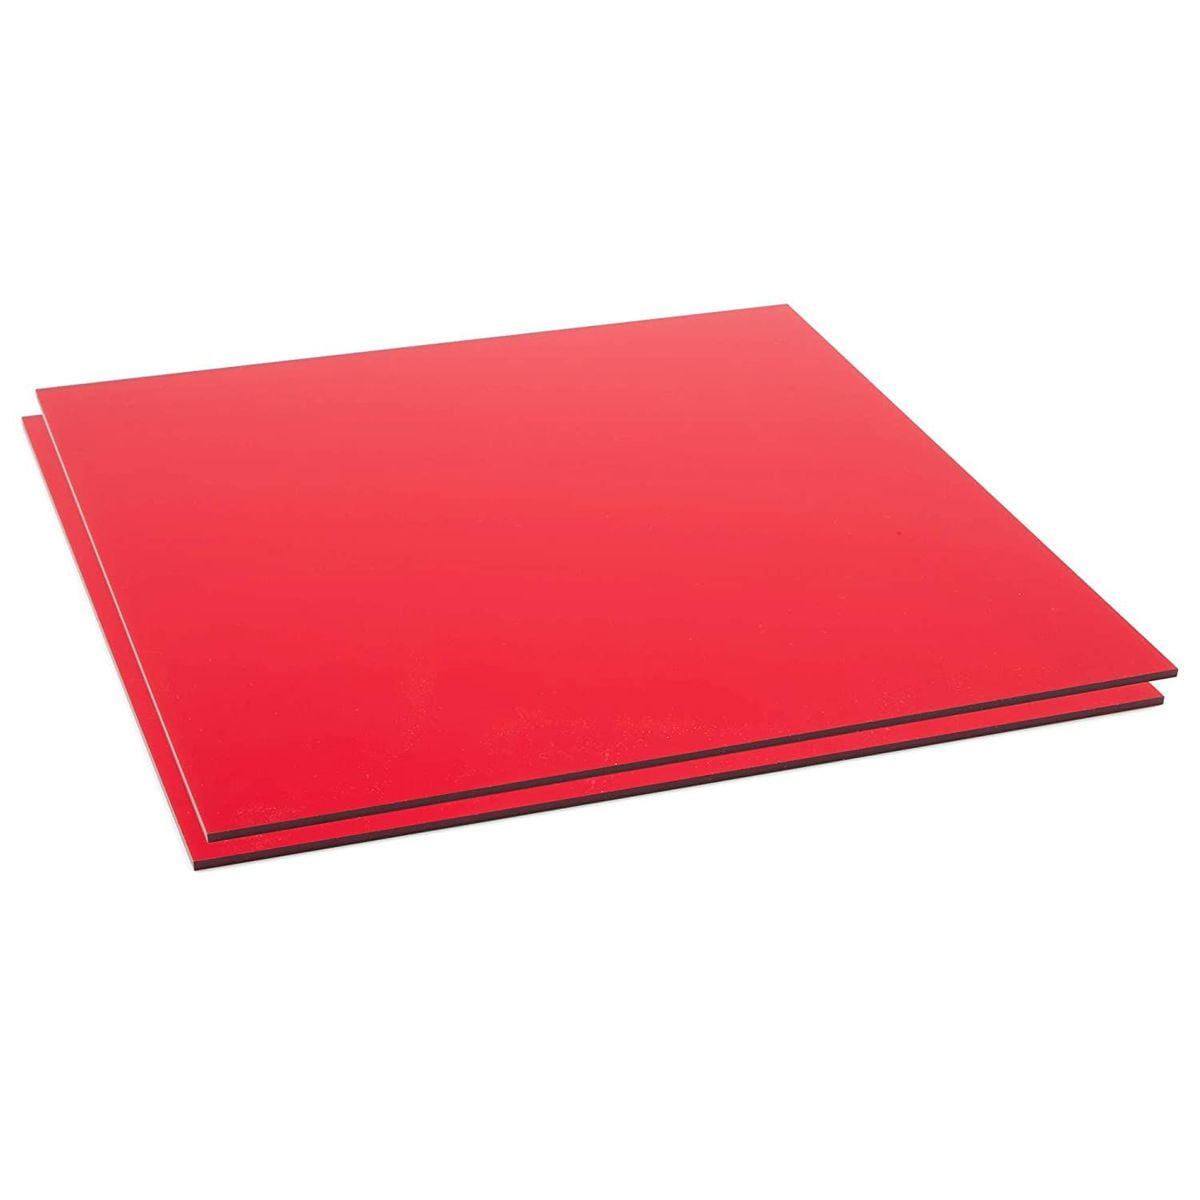 1/8 Inch Thick Translucent Red Cast Acrylic Sheet 12 x 12 Inches, 2 Pack